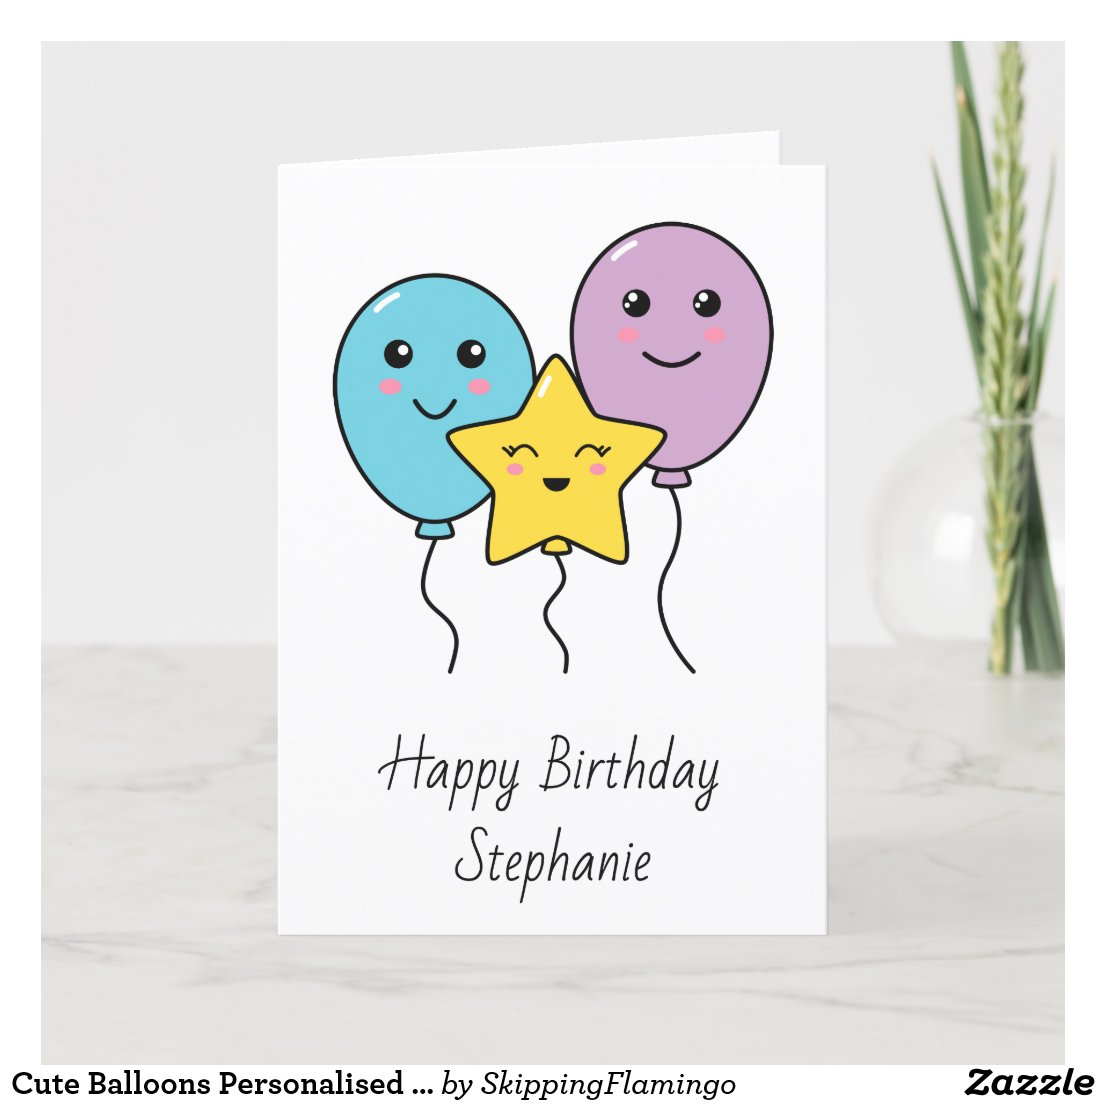 Cute Balloons Personalized Happy Birthday Card